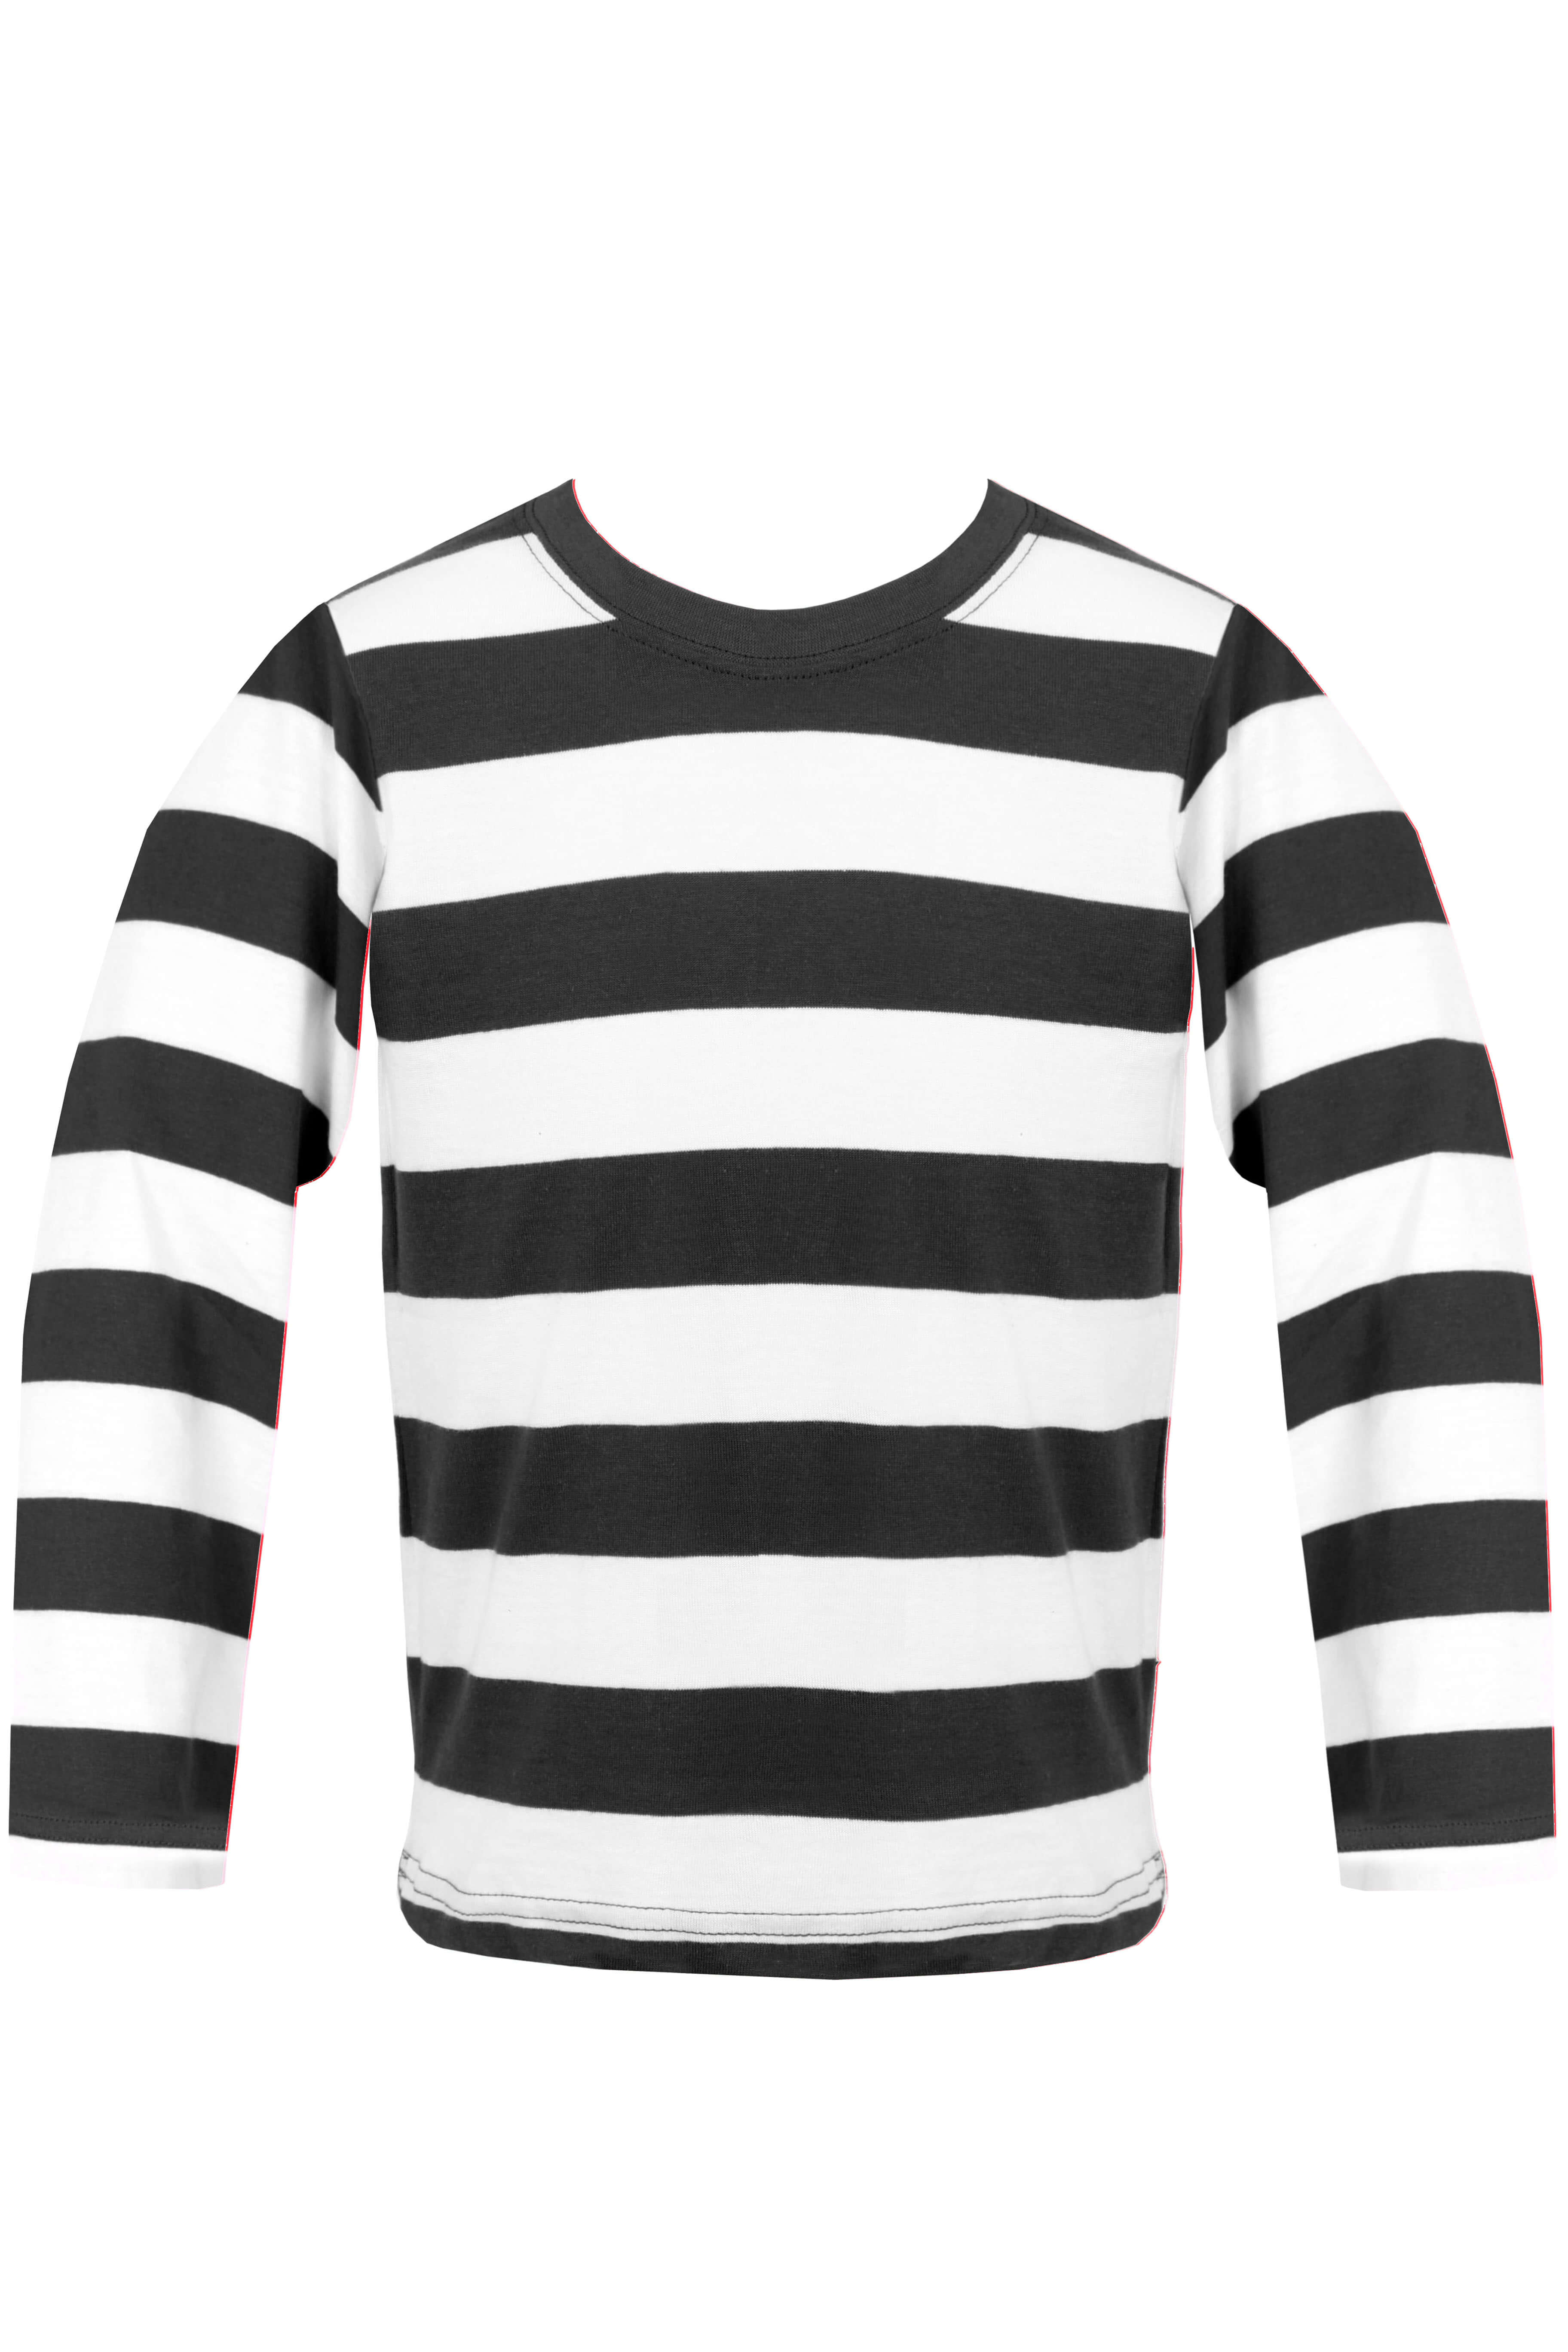 CHILDS STRIPED T SHIRT TOP BLACK AND WHITE FANCY DRESS LONG SLEEVE 100% COTTON 